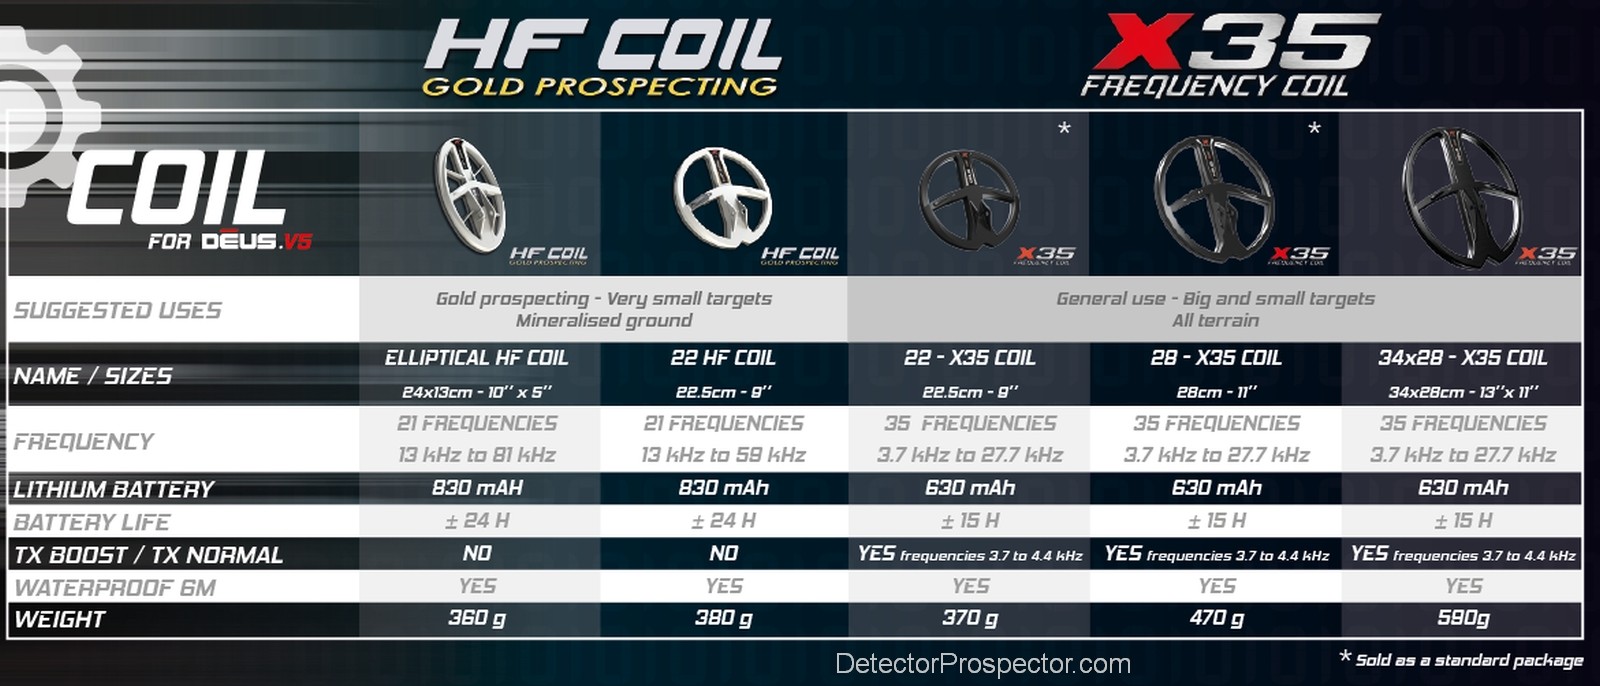 xp-orx-coil-options-specifications.jpg.3